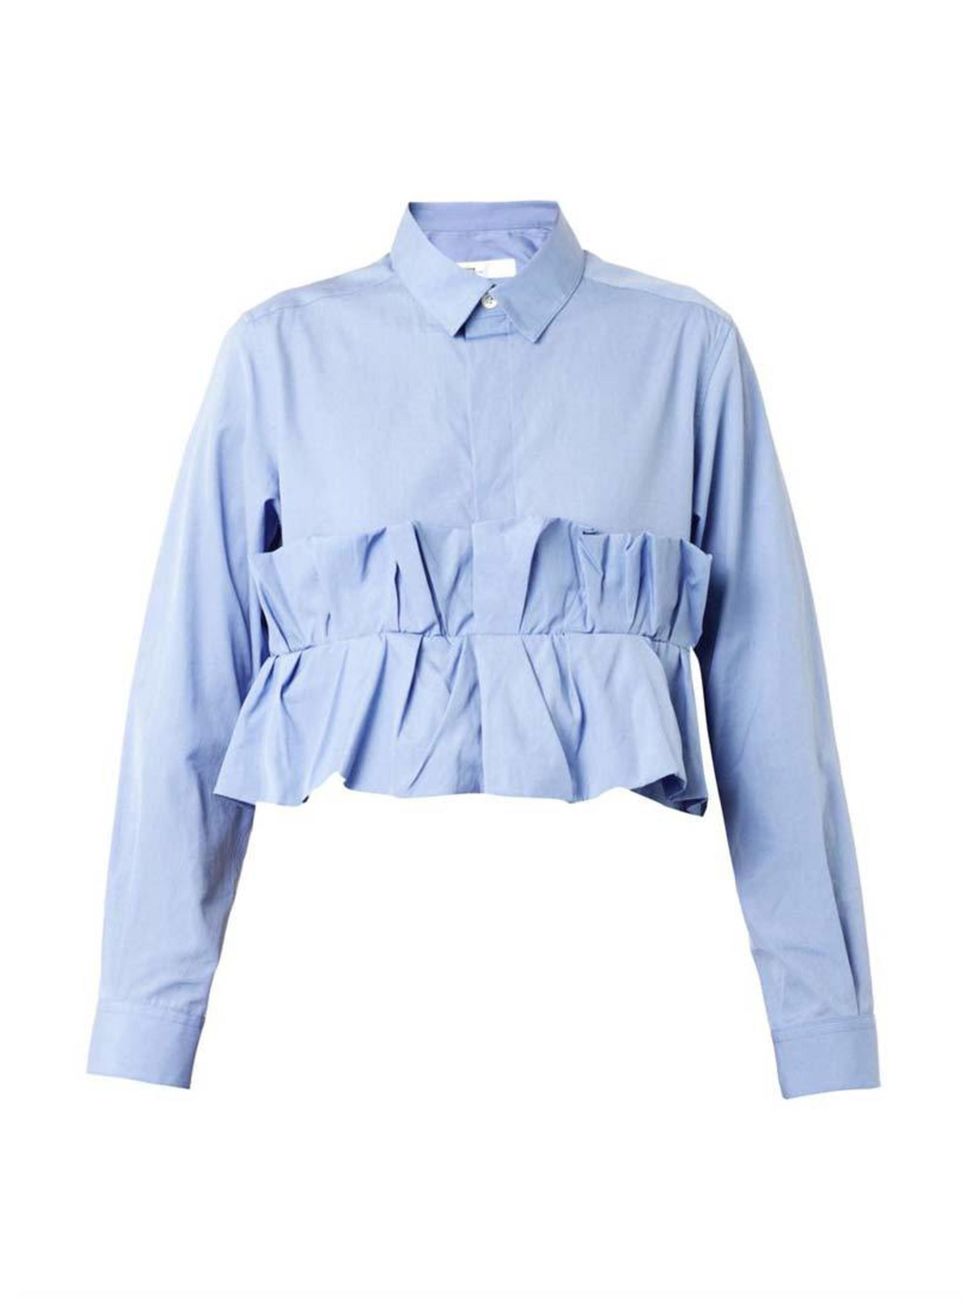 <p>Wear with high-waisted trousers for a very modern take on workwear.</p>

<p> </p>

<p>Toga Archives shirt, £215 at <a href="http://www.matchesfashion.com/product/212553" target="_blank">MatchesFashion.com</a></p>